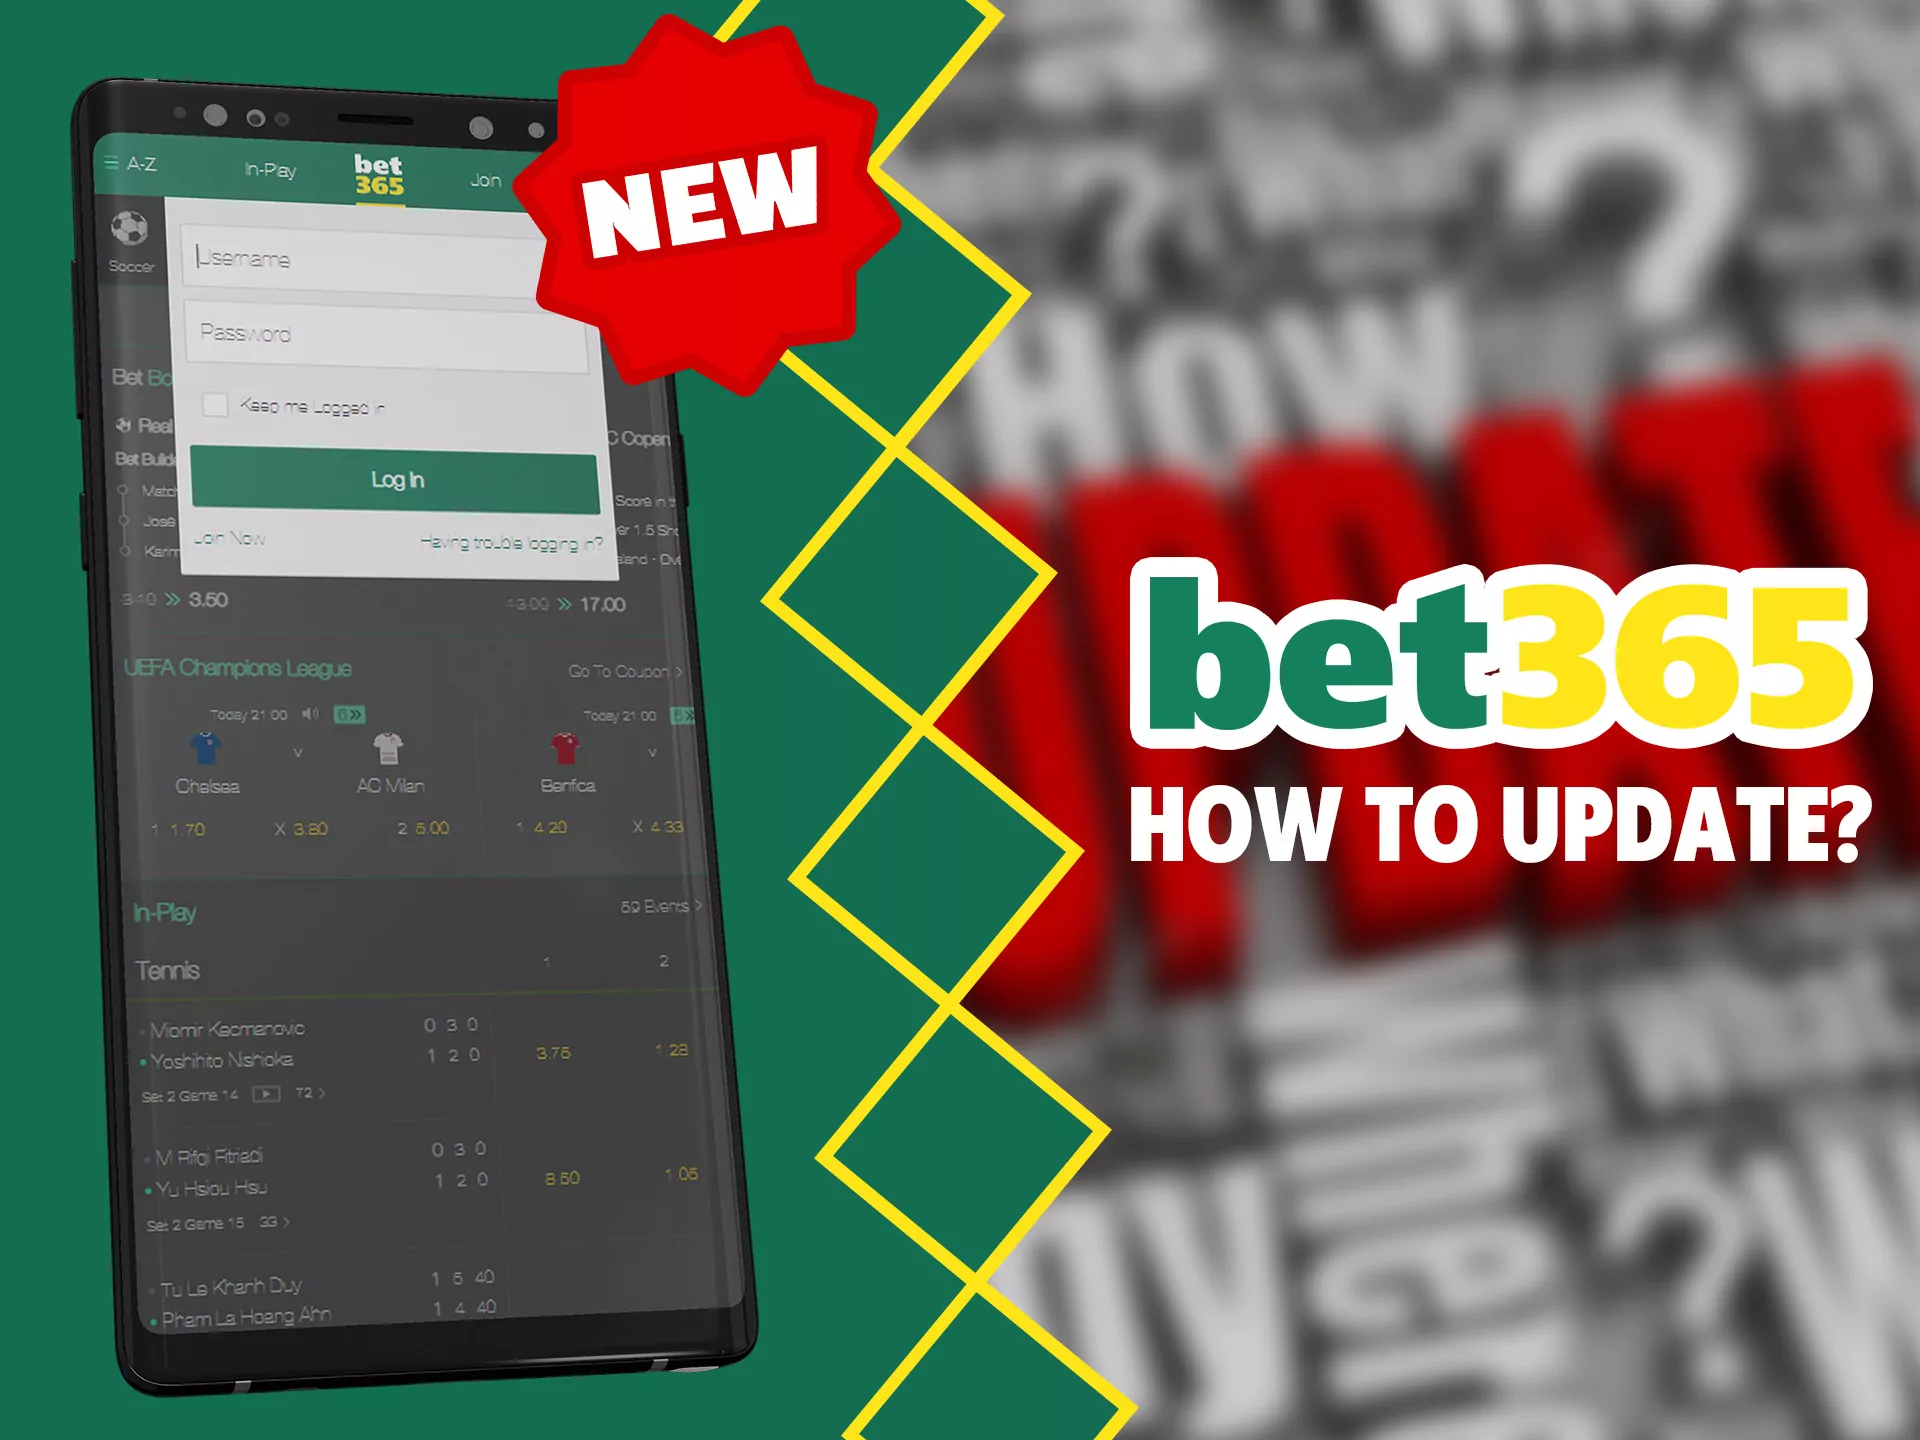 Bet365 app updates automatically after logging in.